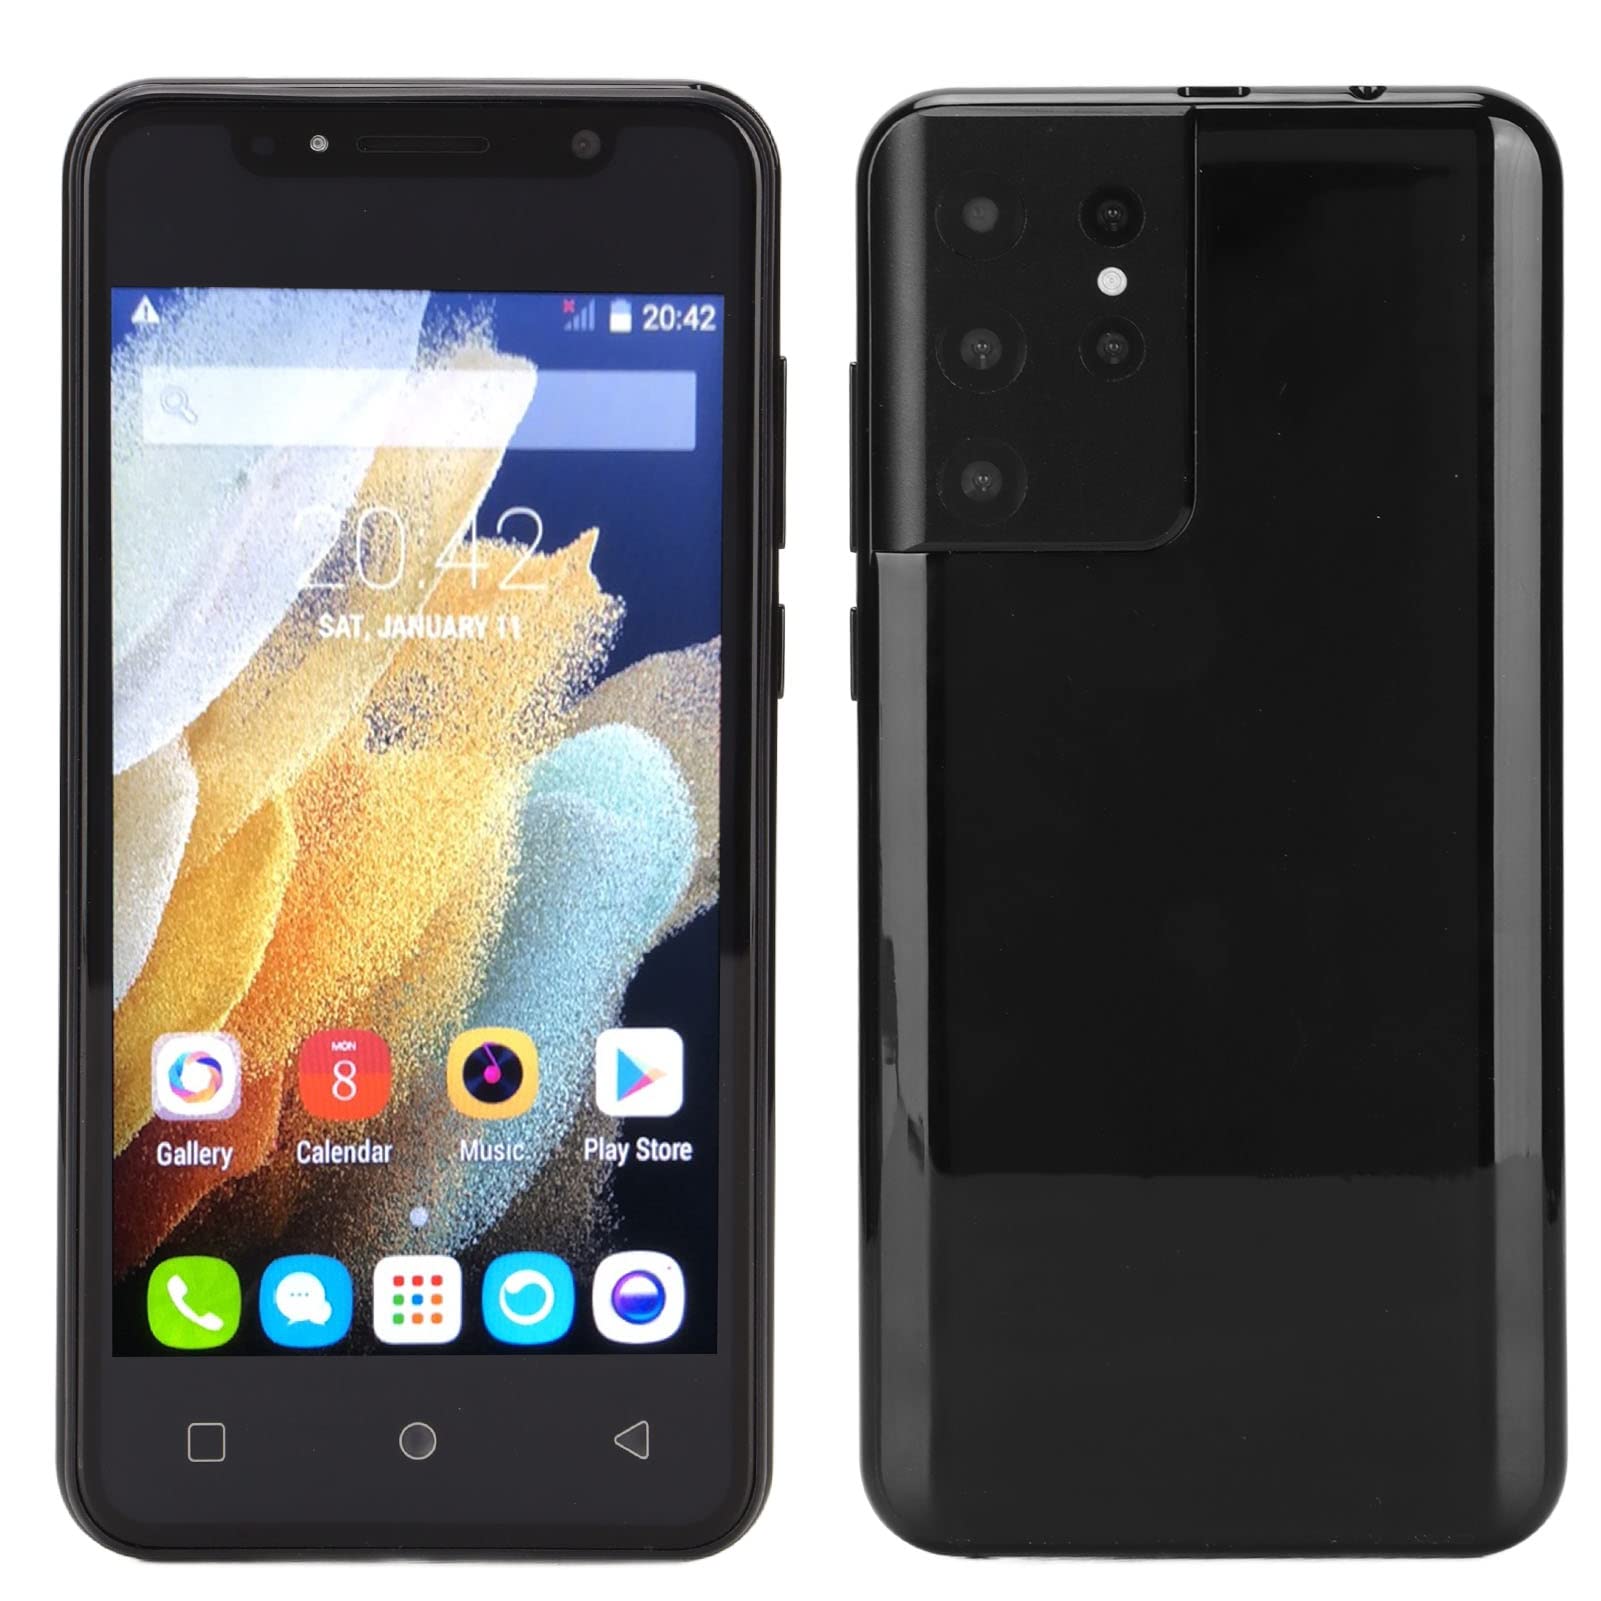 Luqeeg S21 Ultra Smartphone, 6.1In 12GB RAM 512GB ROM Black Smartphone, 24MP and 48MP Dual Camera Mobile Phone, Support Face Recognition, WiFi, BT, GPS, USSB Charging Port for 11